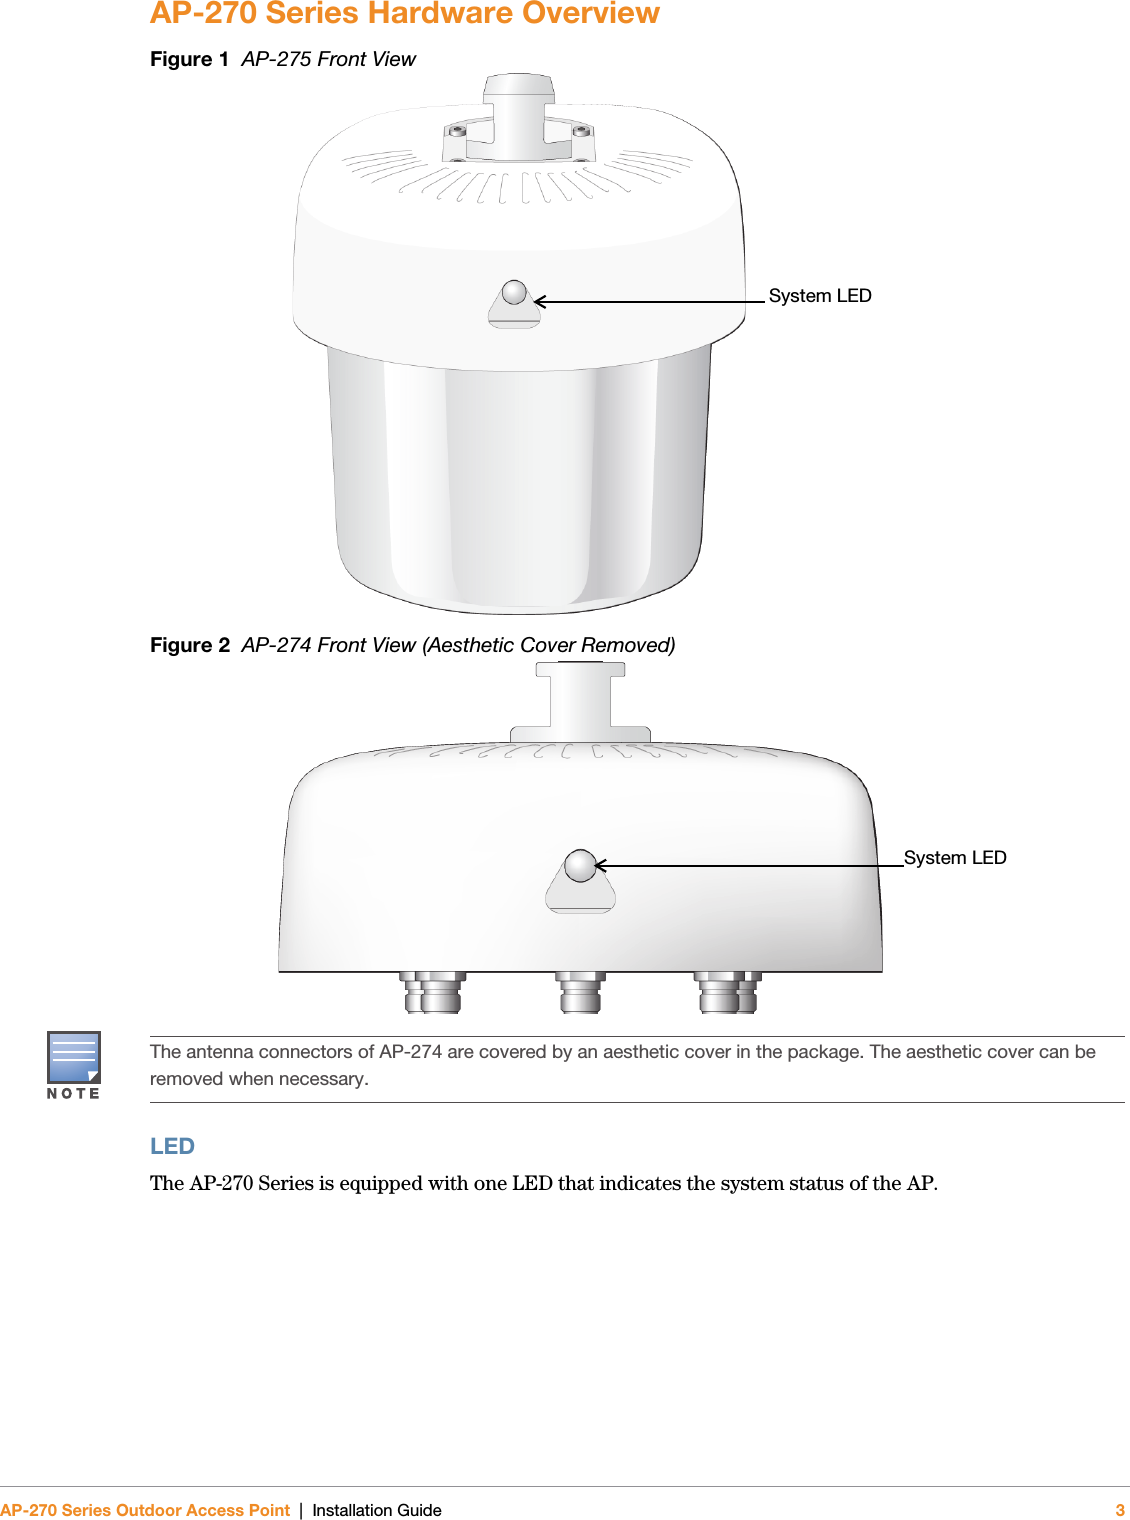 AP-270 Series Outdoor Access Point | Installation Guide 3AP-270 Series Hardware OverviewFigure 1  AP-275 Front ViewFigure 2  AP-274 Front View (Aesthetic Cover Removed)LED The AP-270 Series is equipped with one LED that indicates the system status of the AP.System LEDSystem LEDThe antenna connectors of AP-274 are covered by an aesthetic cover in the package. The aesthetic cover can be removed when necessary.